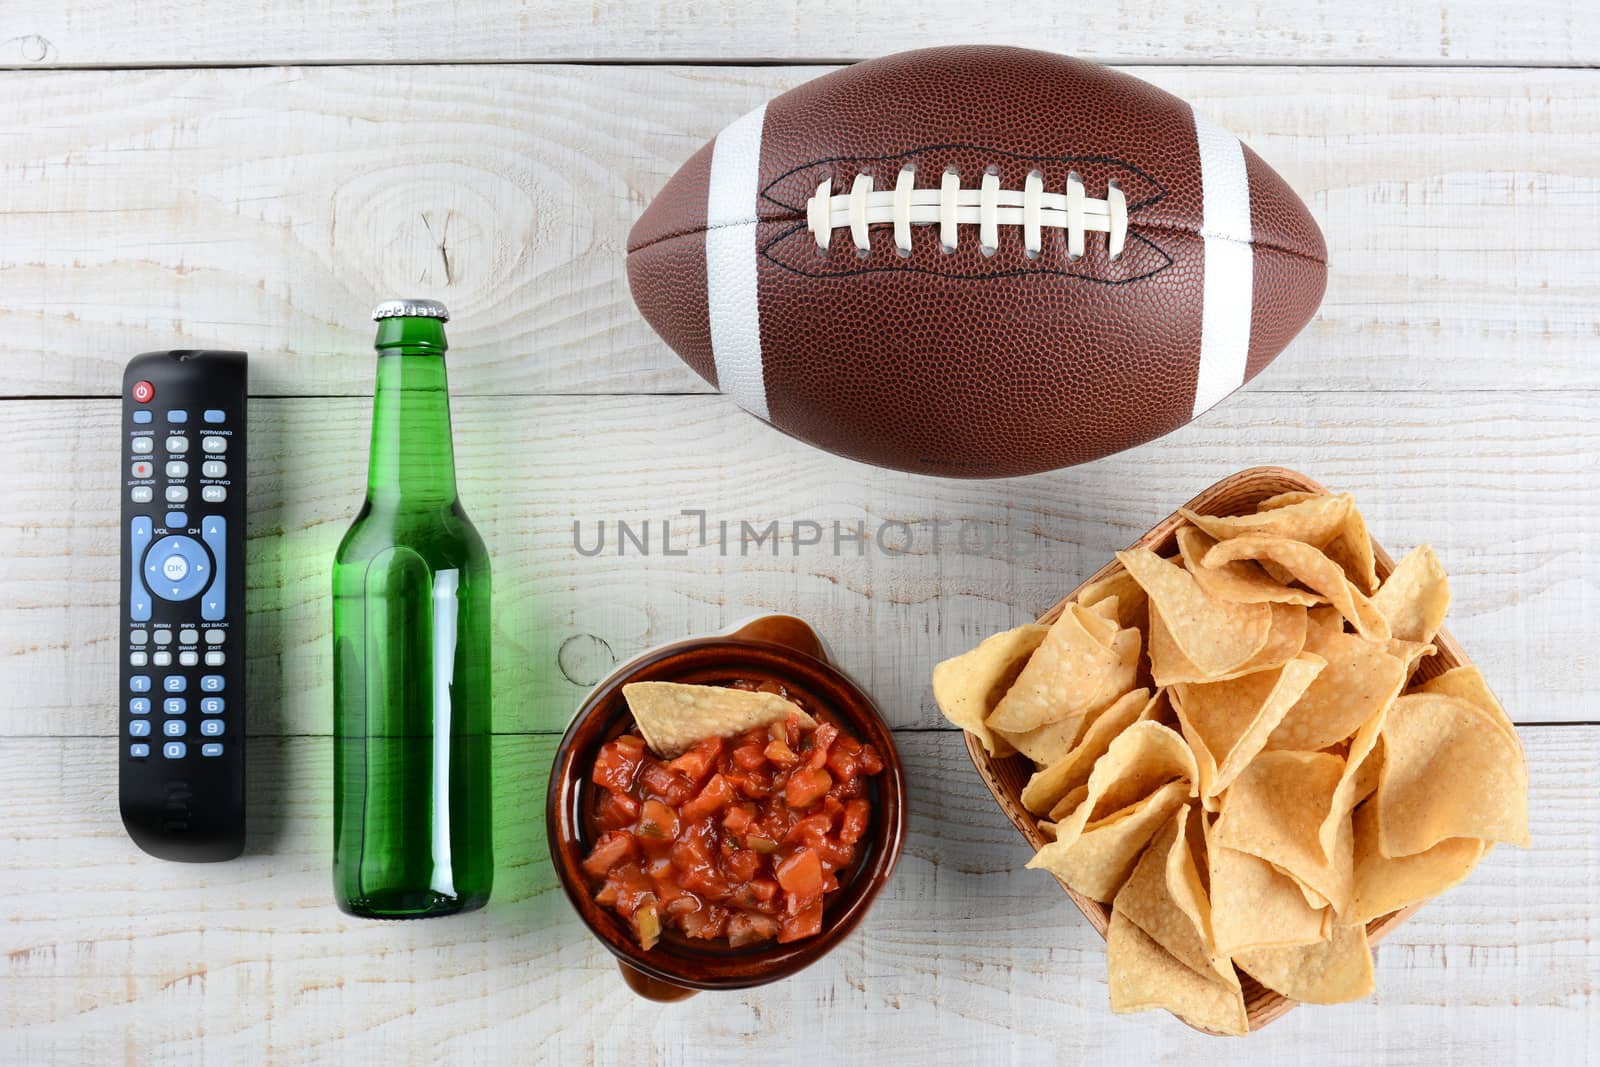 TV Remote, beer bottle, bowl of chips with salsa and an American style football on a rustic whitewashed wood surface. Horizontal format. Great for Super Bowl party themed projects.